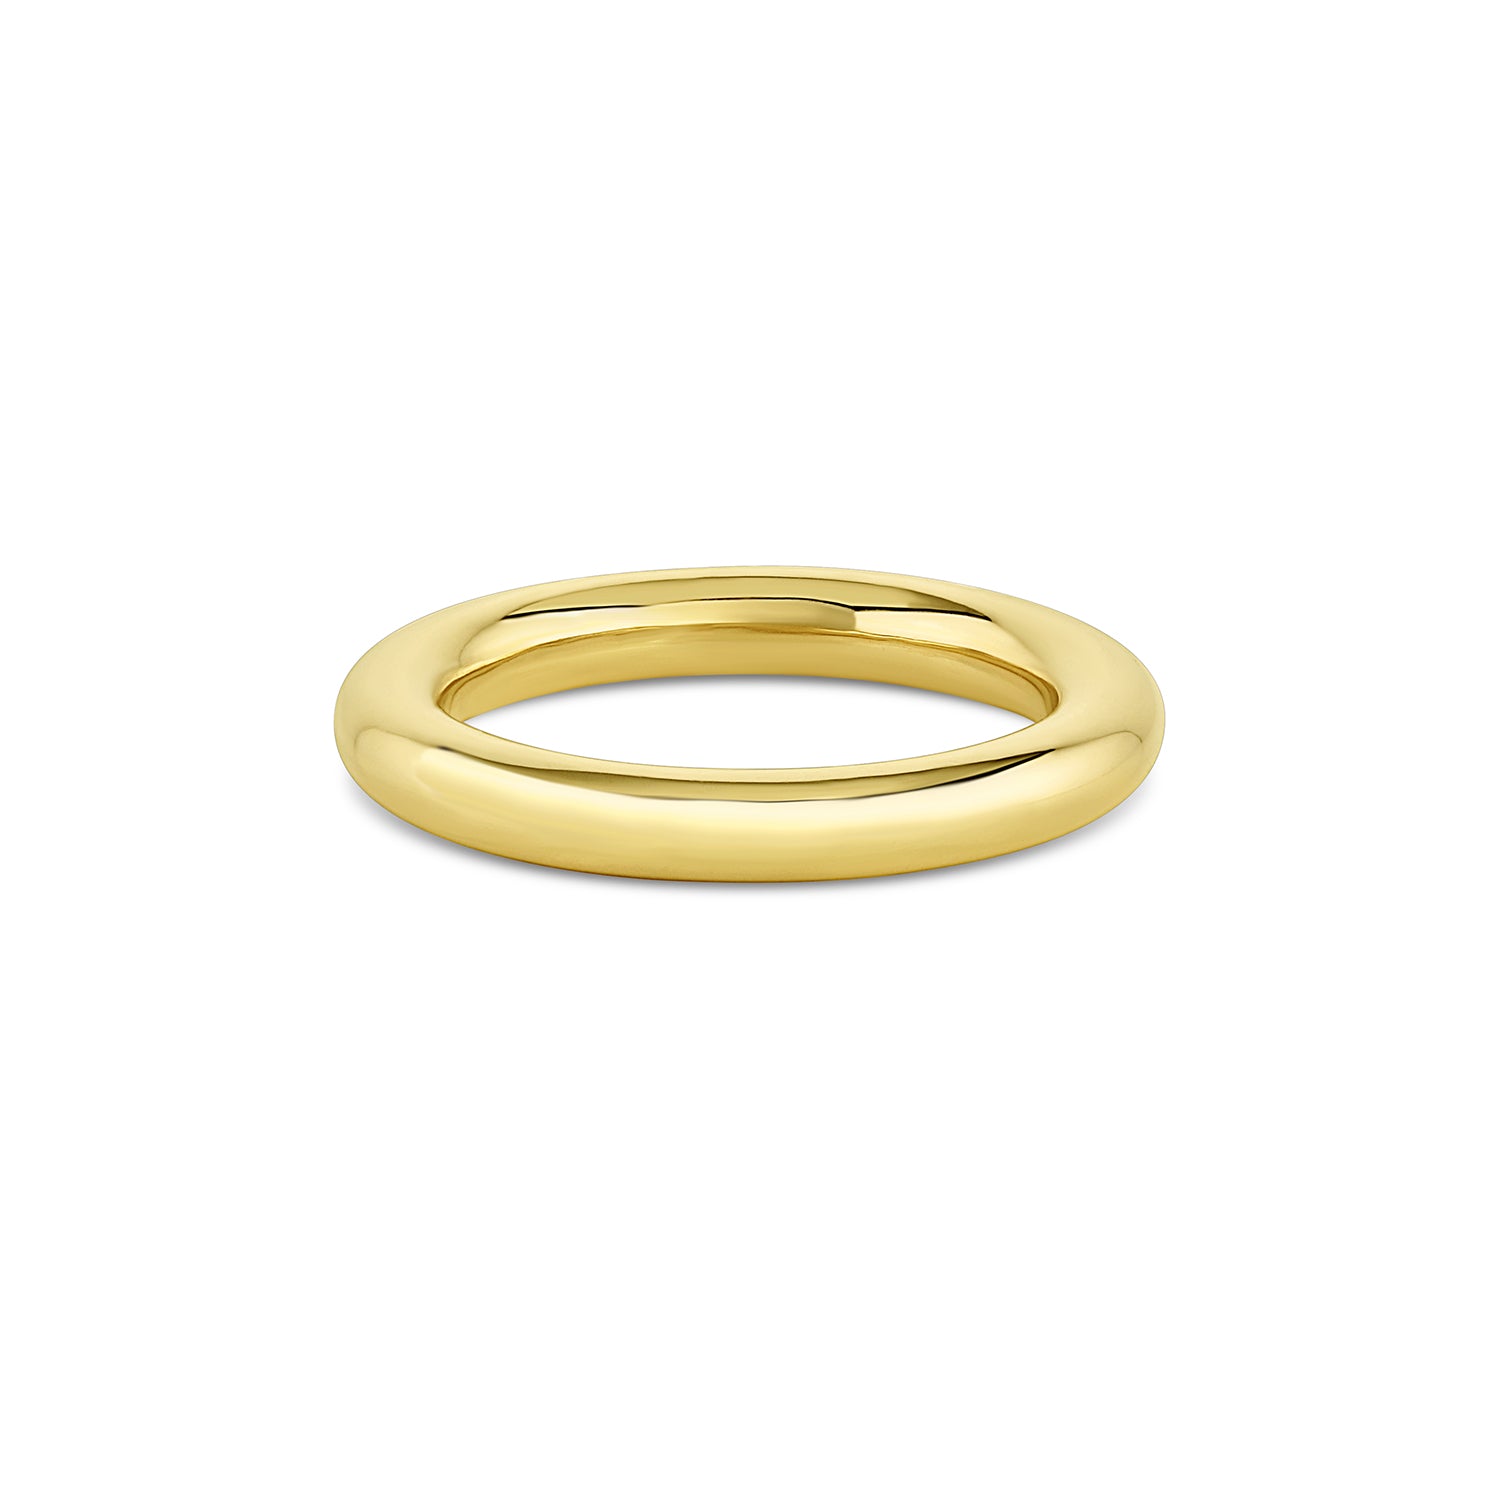 KUNDLI GEMS Couple Challa ring Natural Gold Plated Challa Ring's Easy to  wear and Fashionable for men & women Stone Gold Plated Ring Price in India  - Buy KUNDLI GEMS Couple Challa